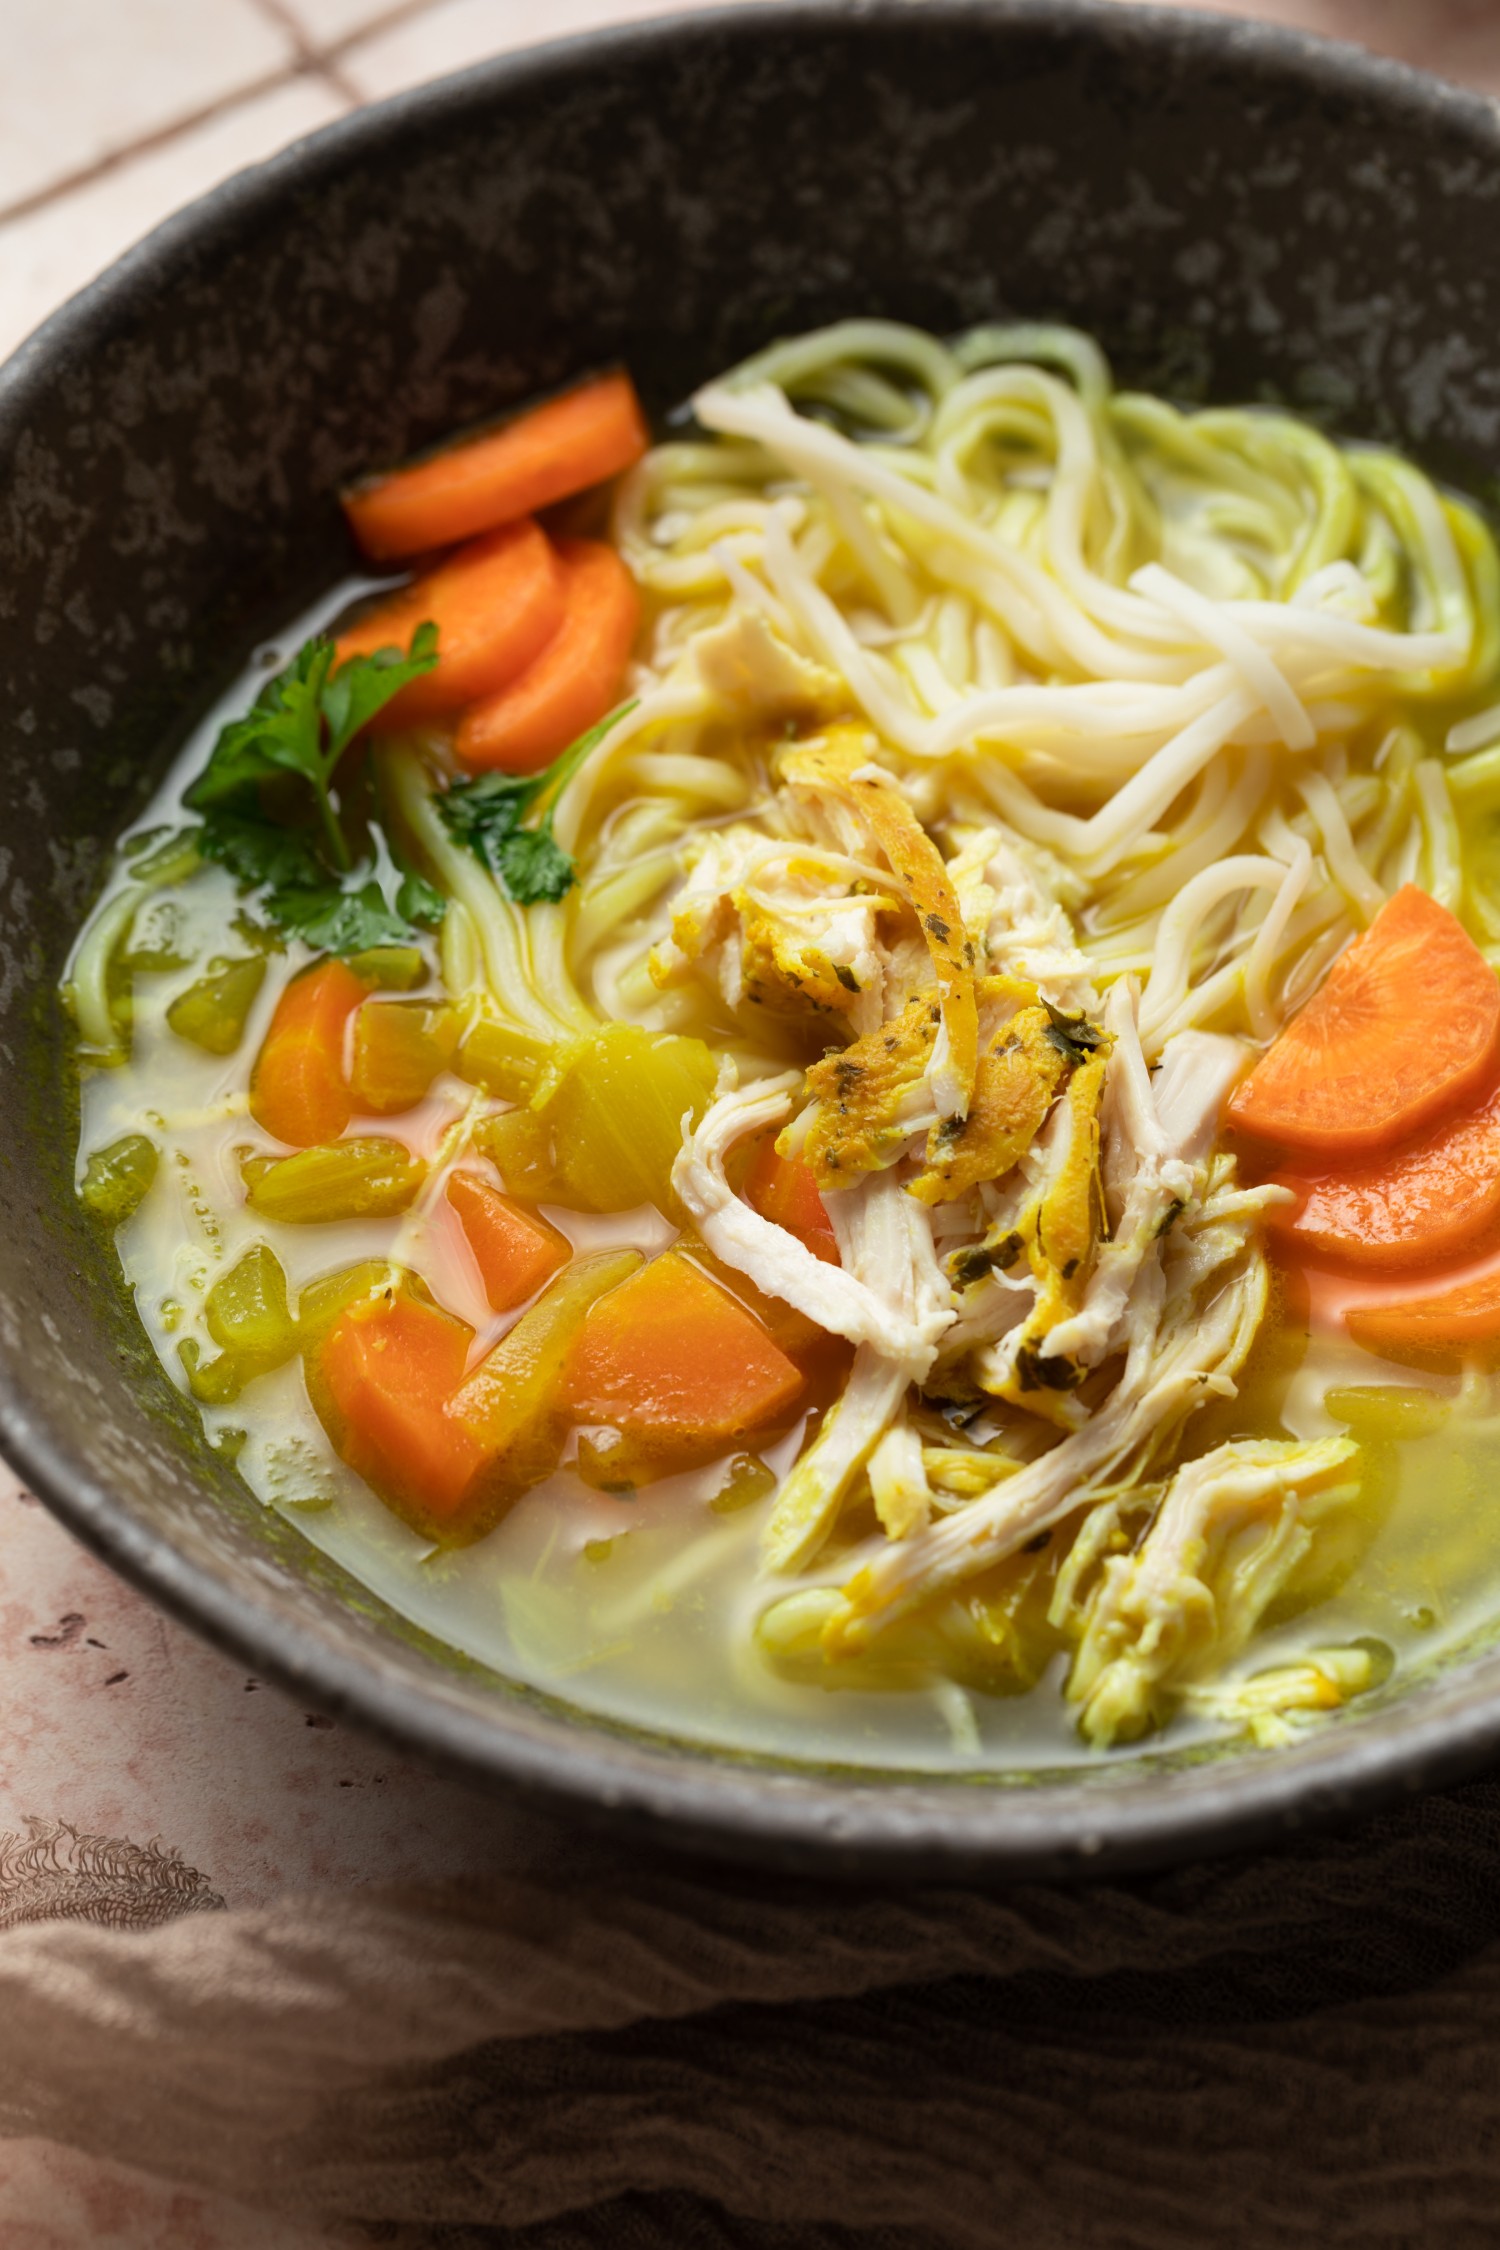 Homemade Chicken Noodle Soup for a Cold